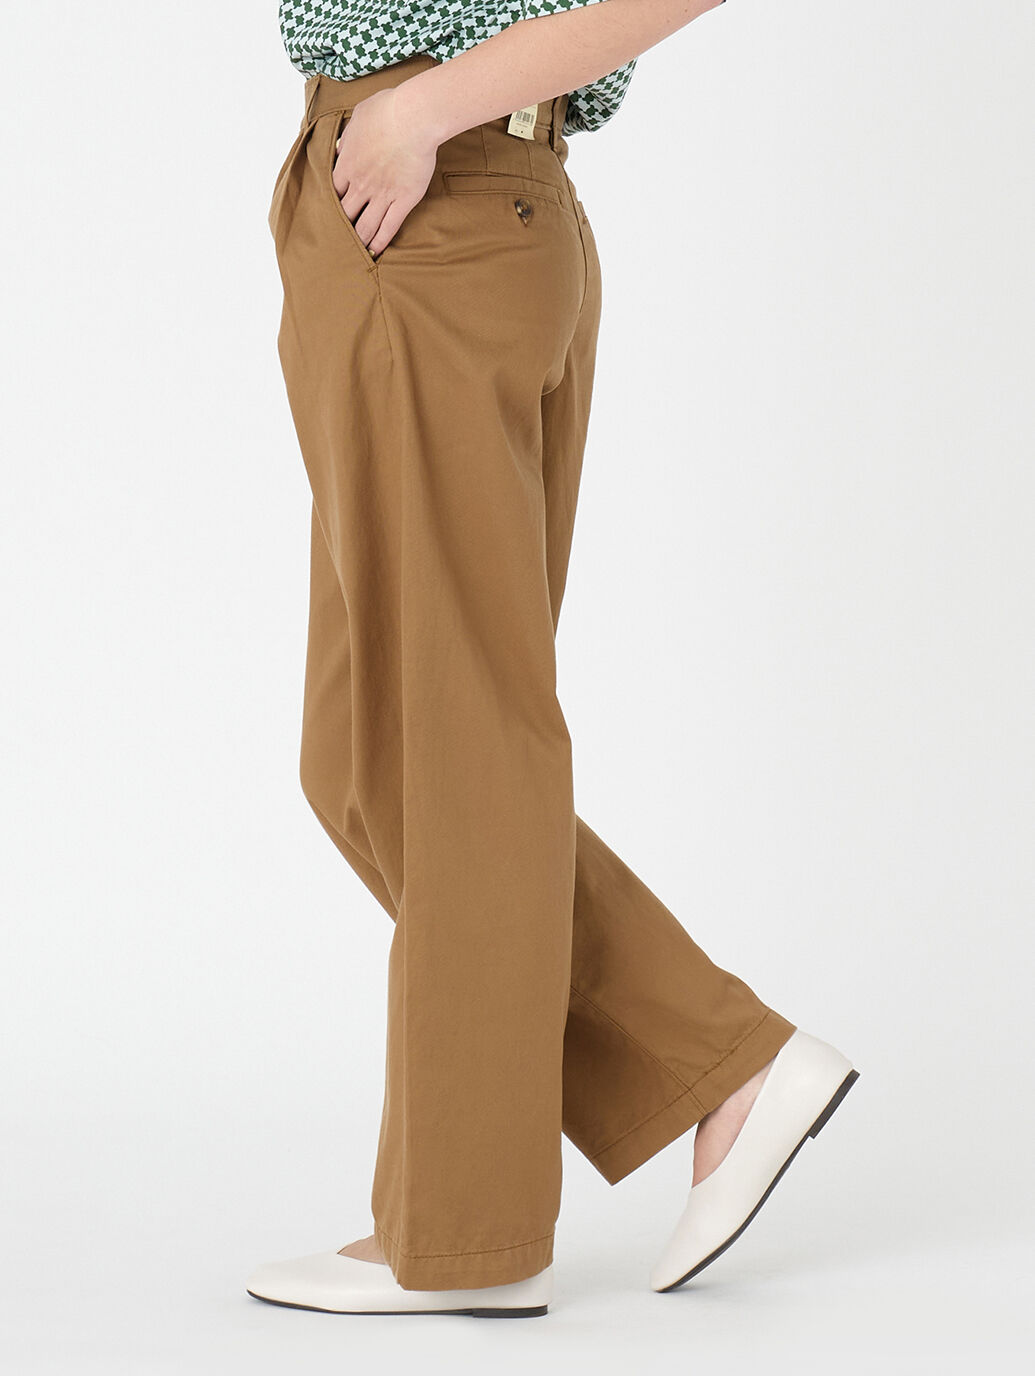 HR PLEATED BAGGY TROUSER ブラウン FOXTROT BROWN｜リーバイス® 公式通販